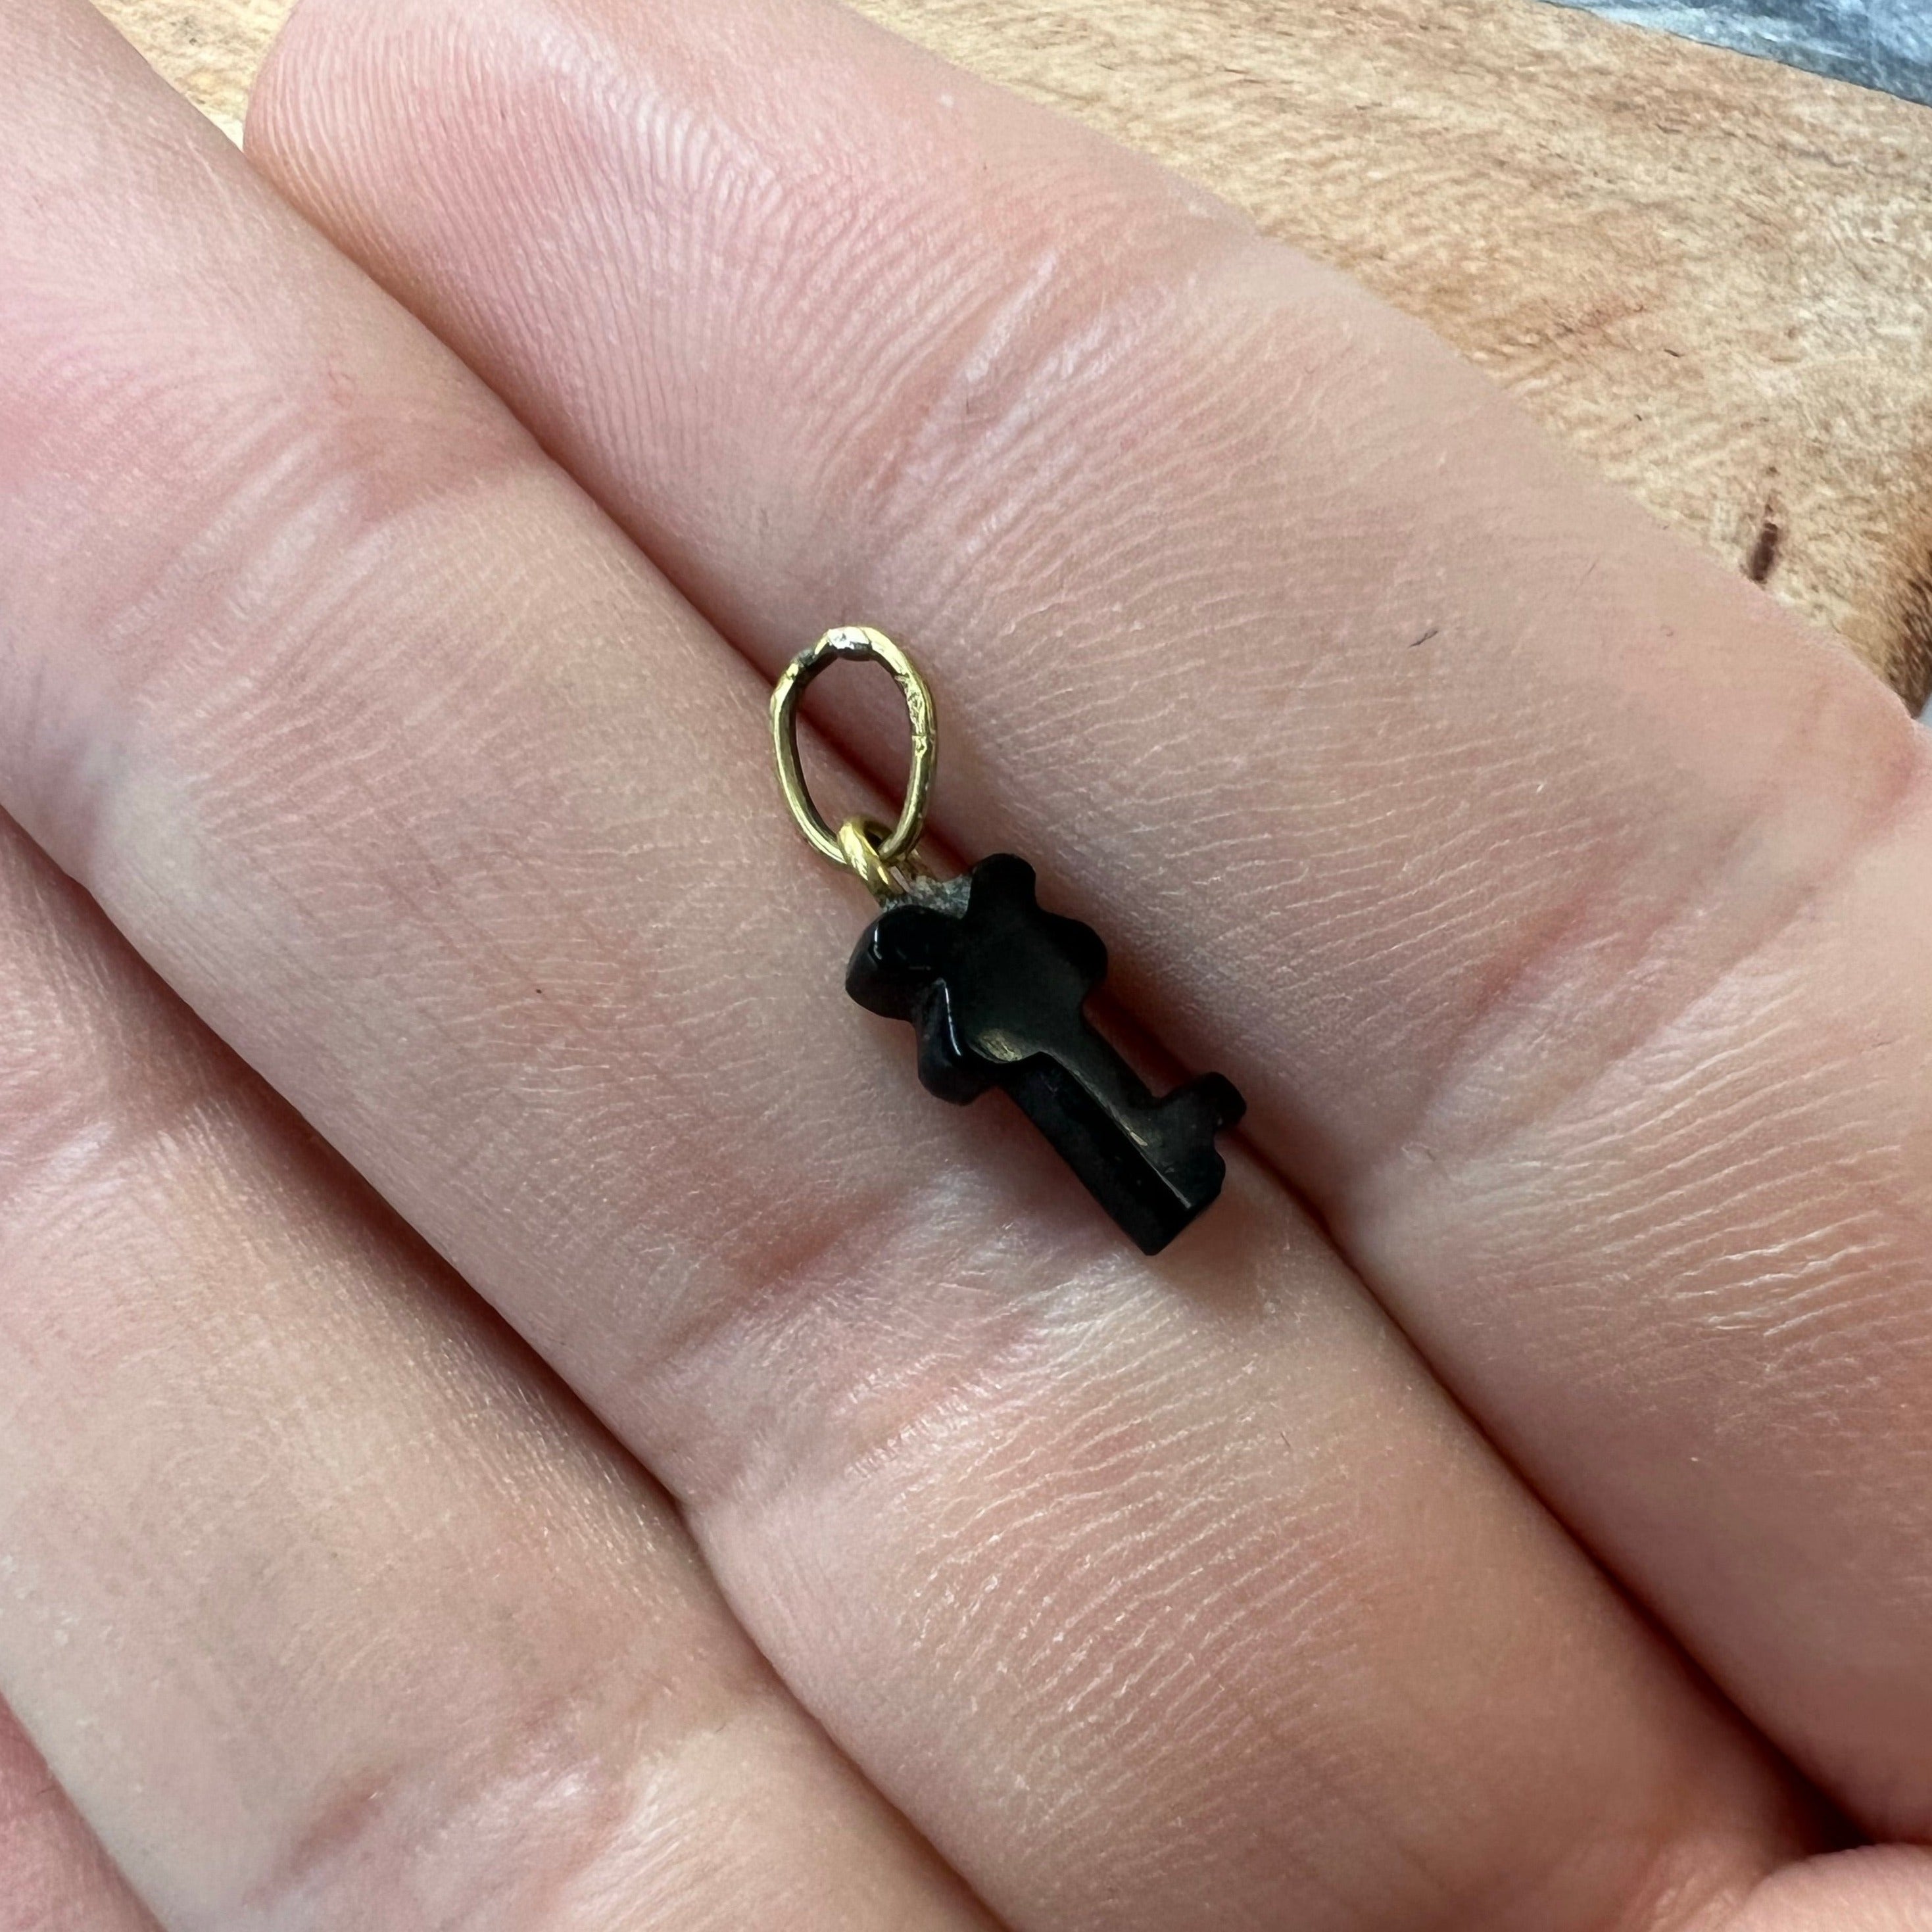 Solid 14K Yellow Gold and Black Onyx Key Pendant Charm